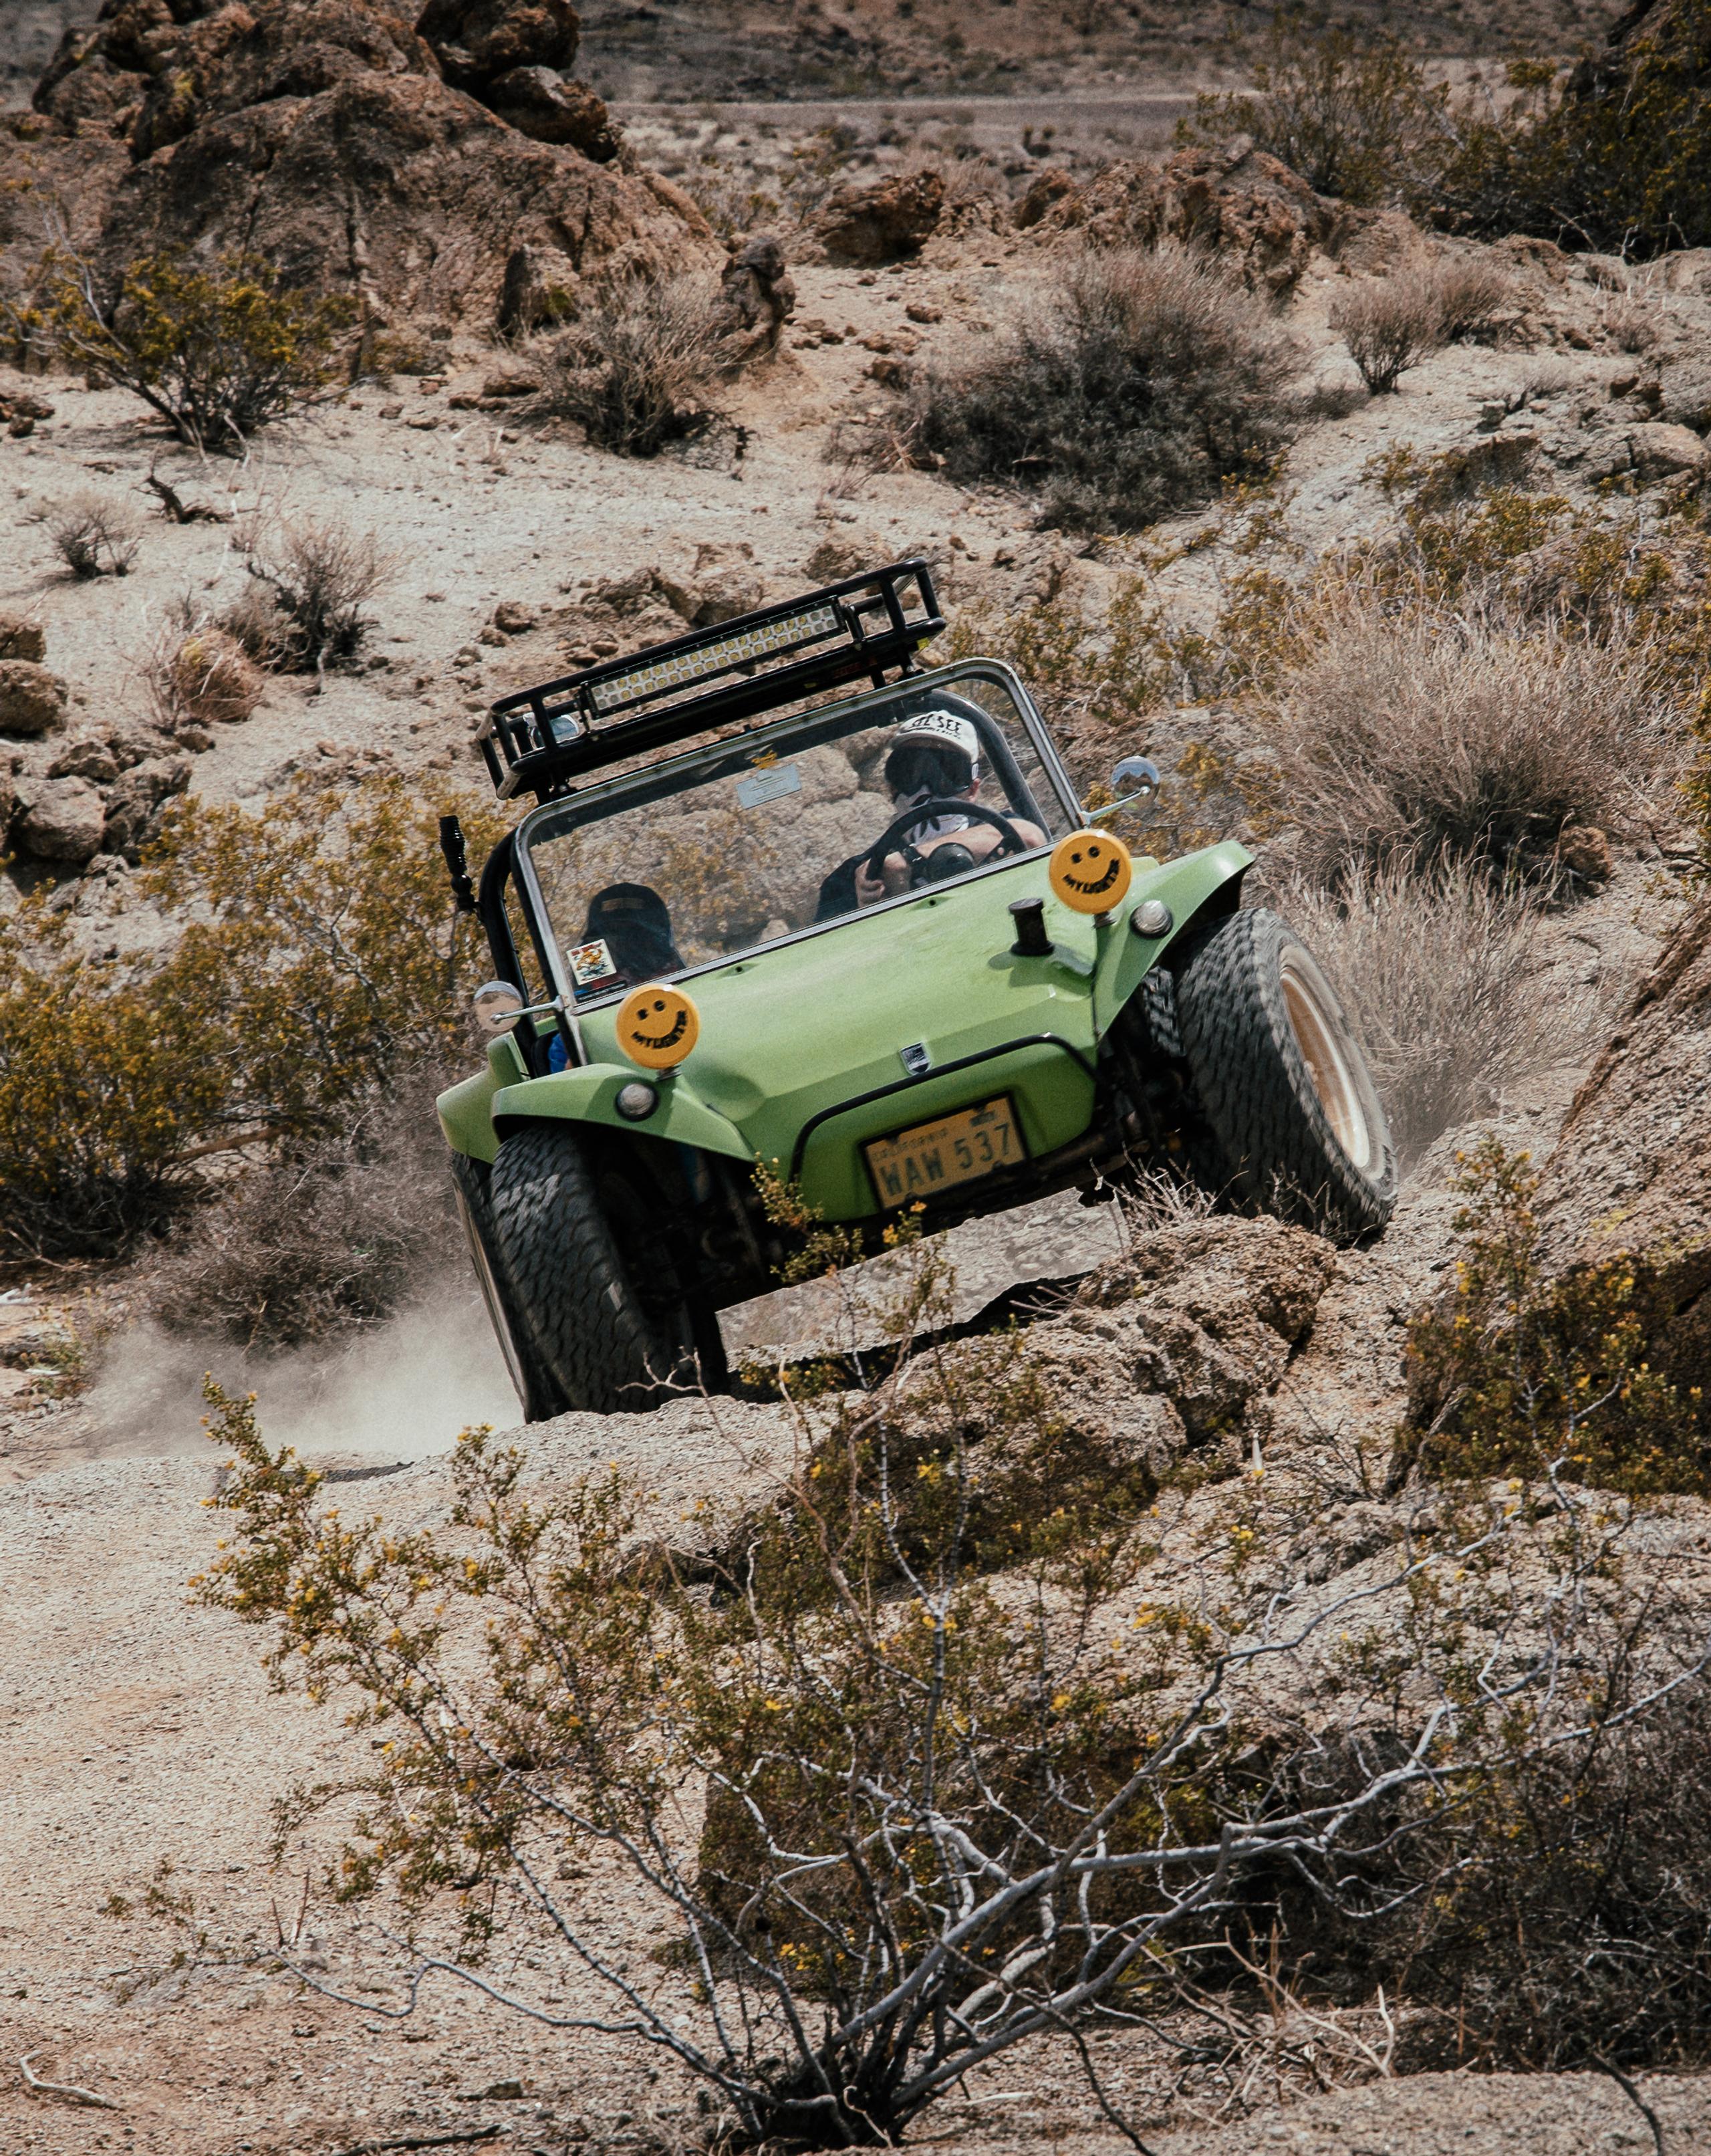 Modified green vehicle off-roading in the desert